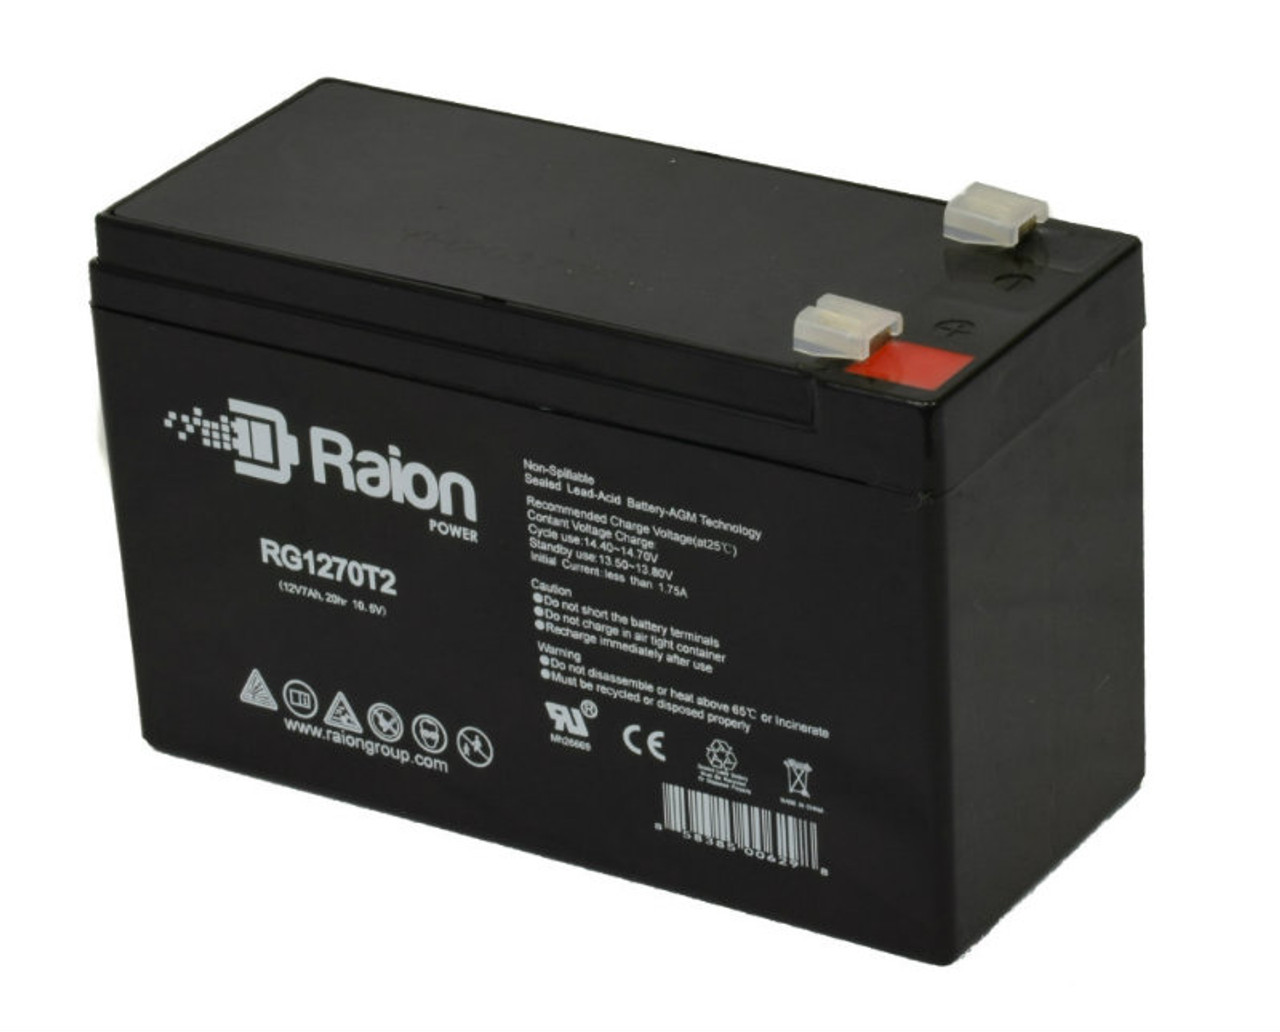 Raion Power RG1270T2 12V 7Ah Rechargeable Battery for Taico TP12-7